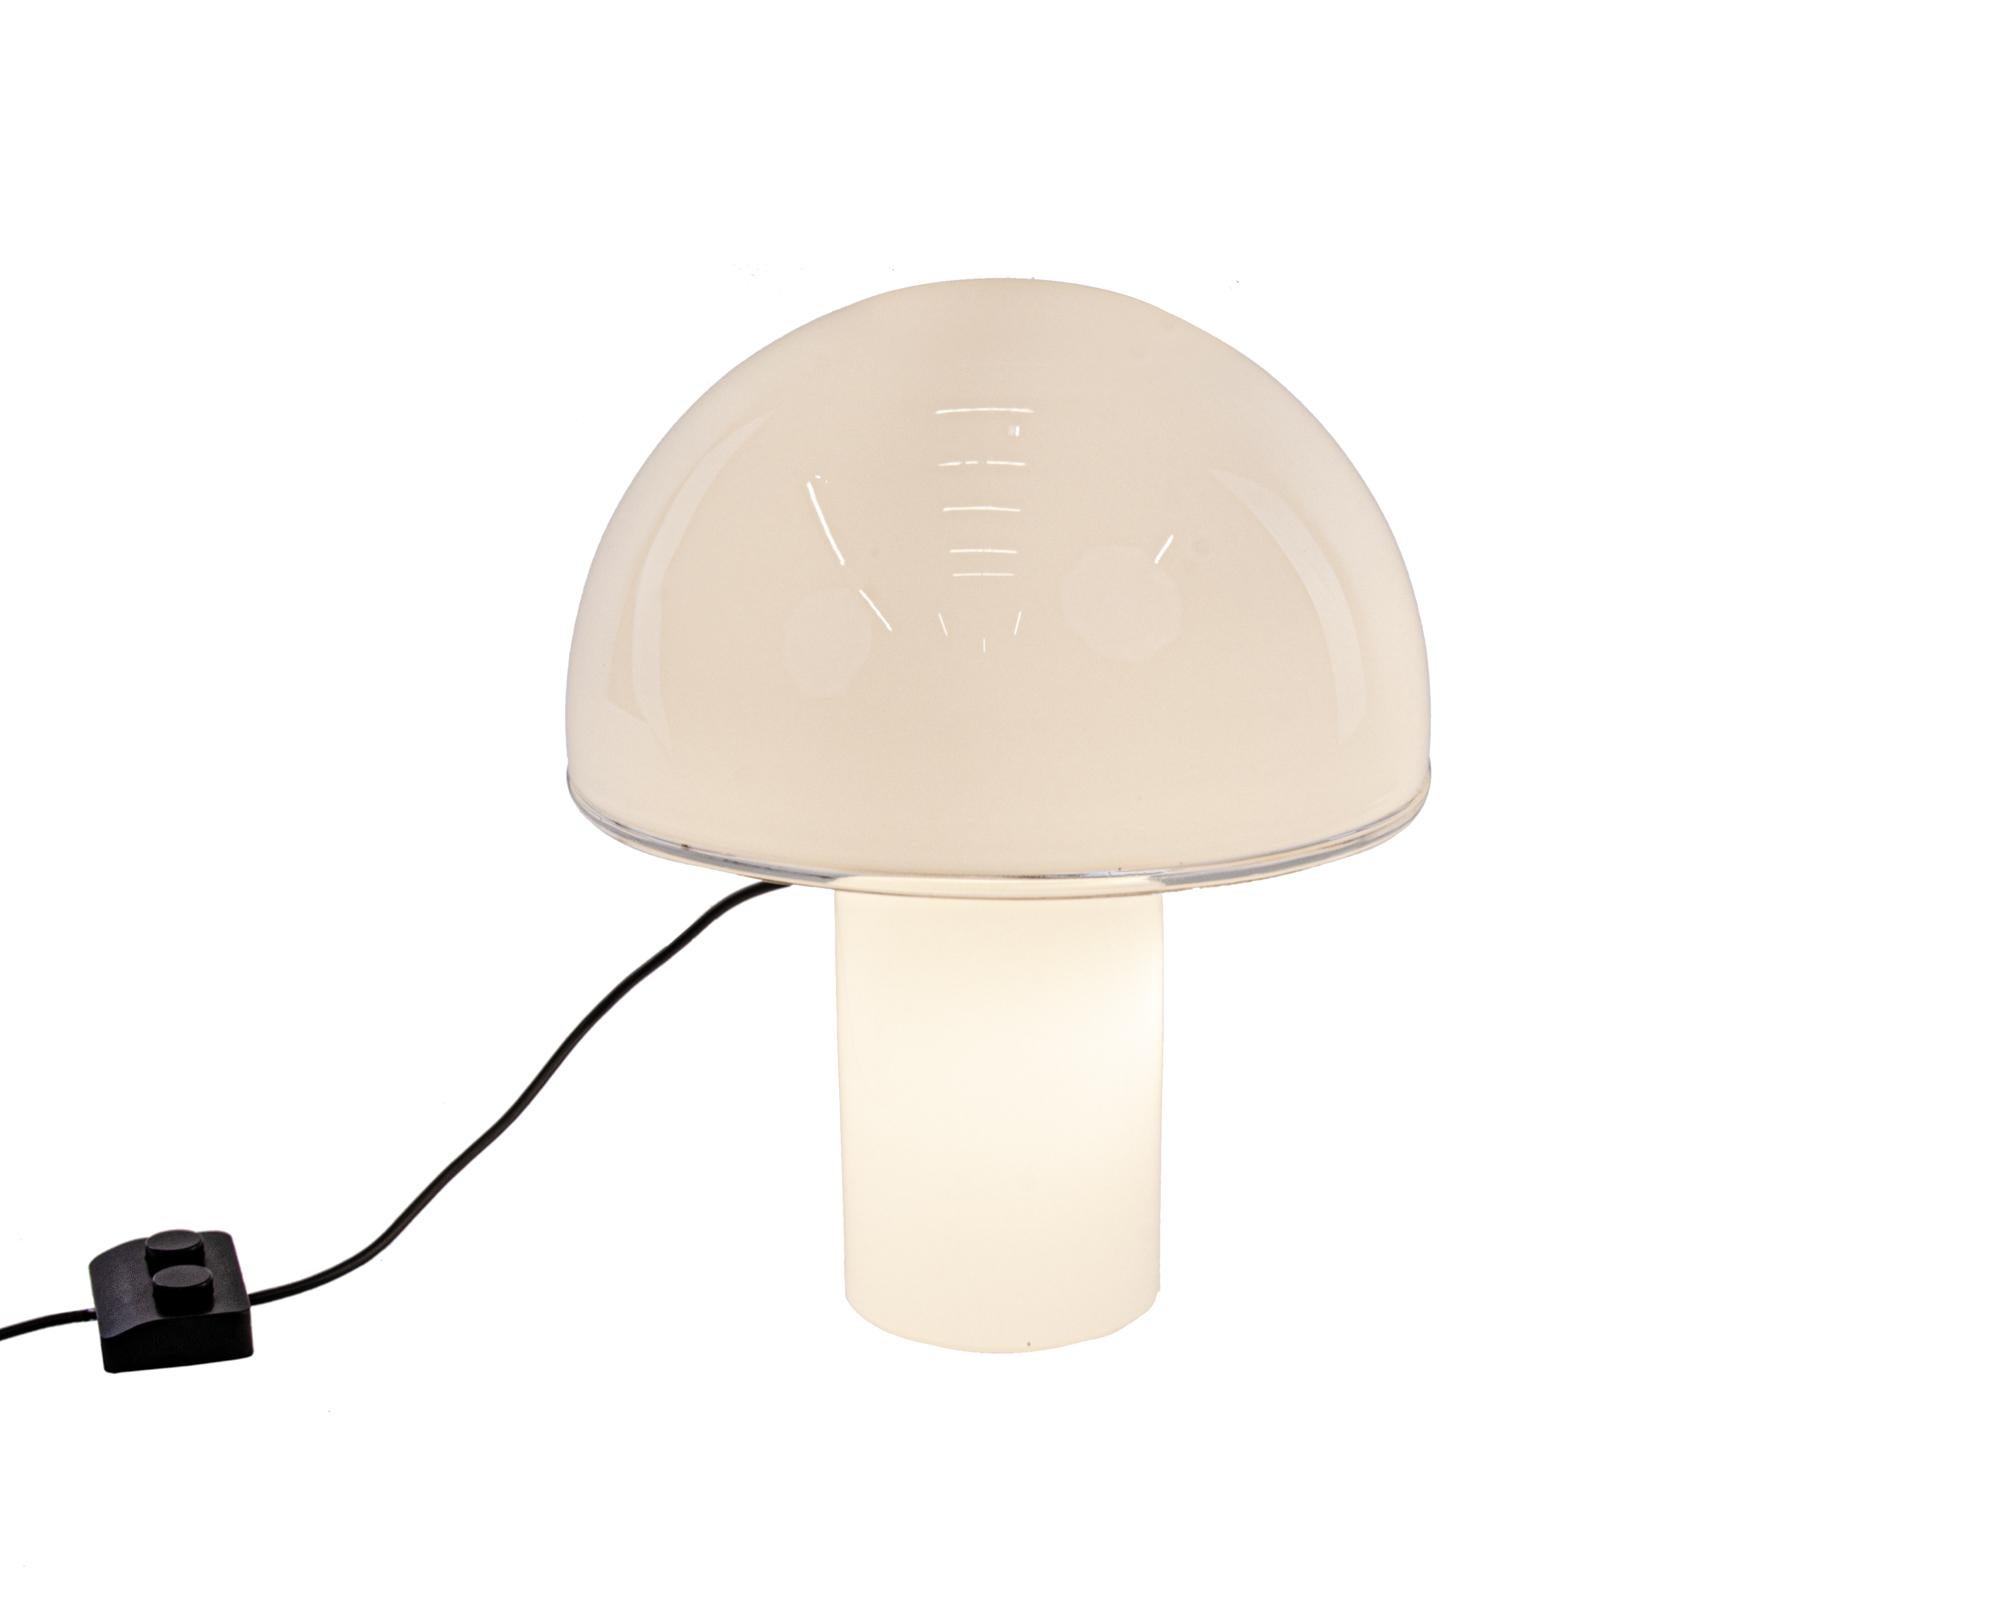 Onfale Tavolo Big - the large version of the mushroom lamp made of hand blown white opaline Murano glass and designed by Luciano Vistosi in 1978.

Body and diffuser in white opaline blown glass. Transparent crystal edge added. Lights can be switched